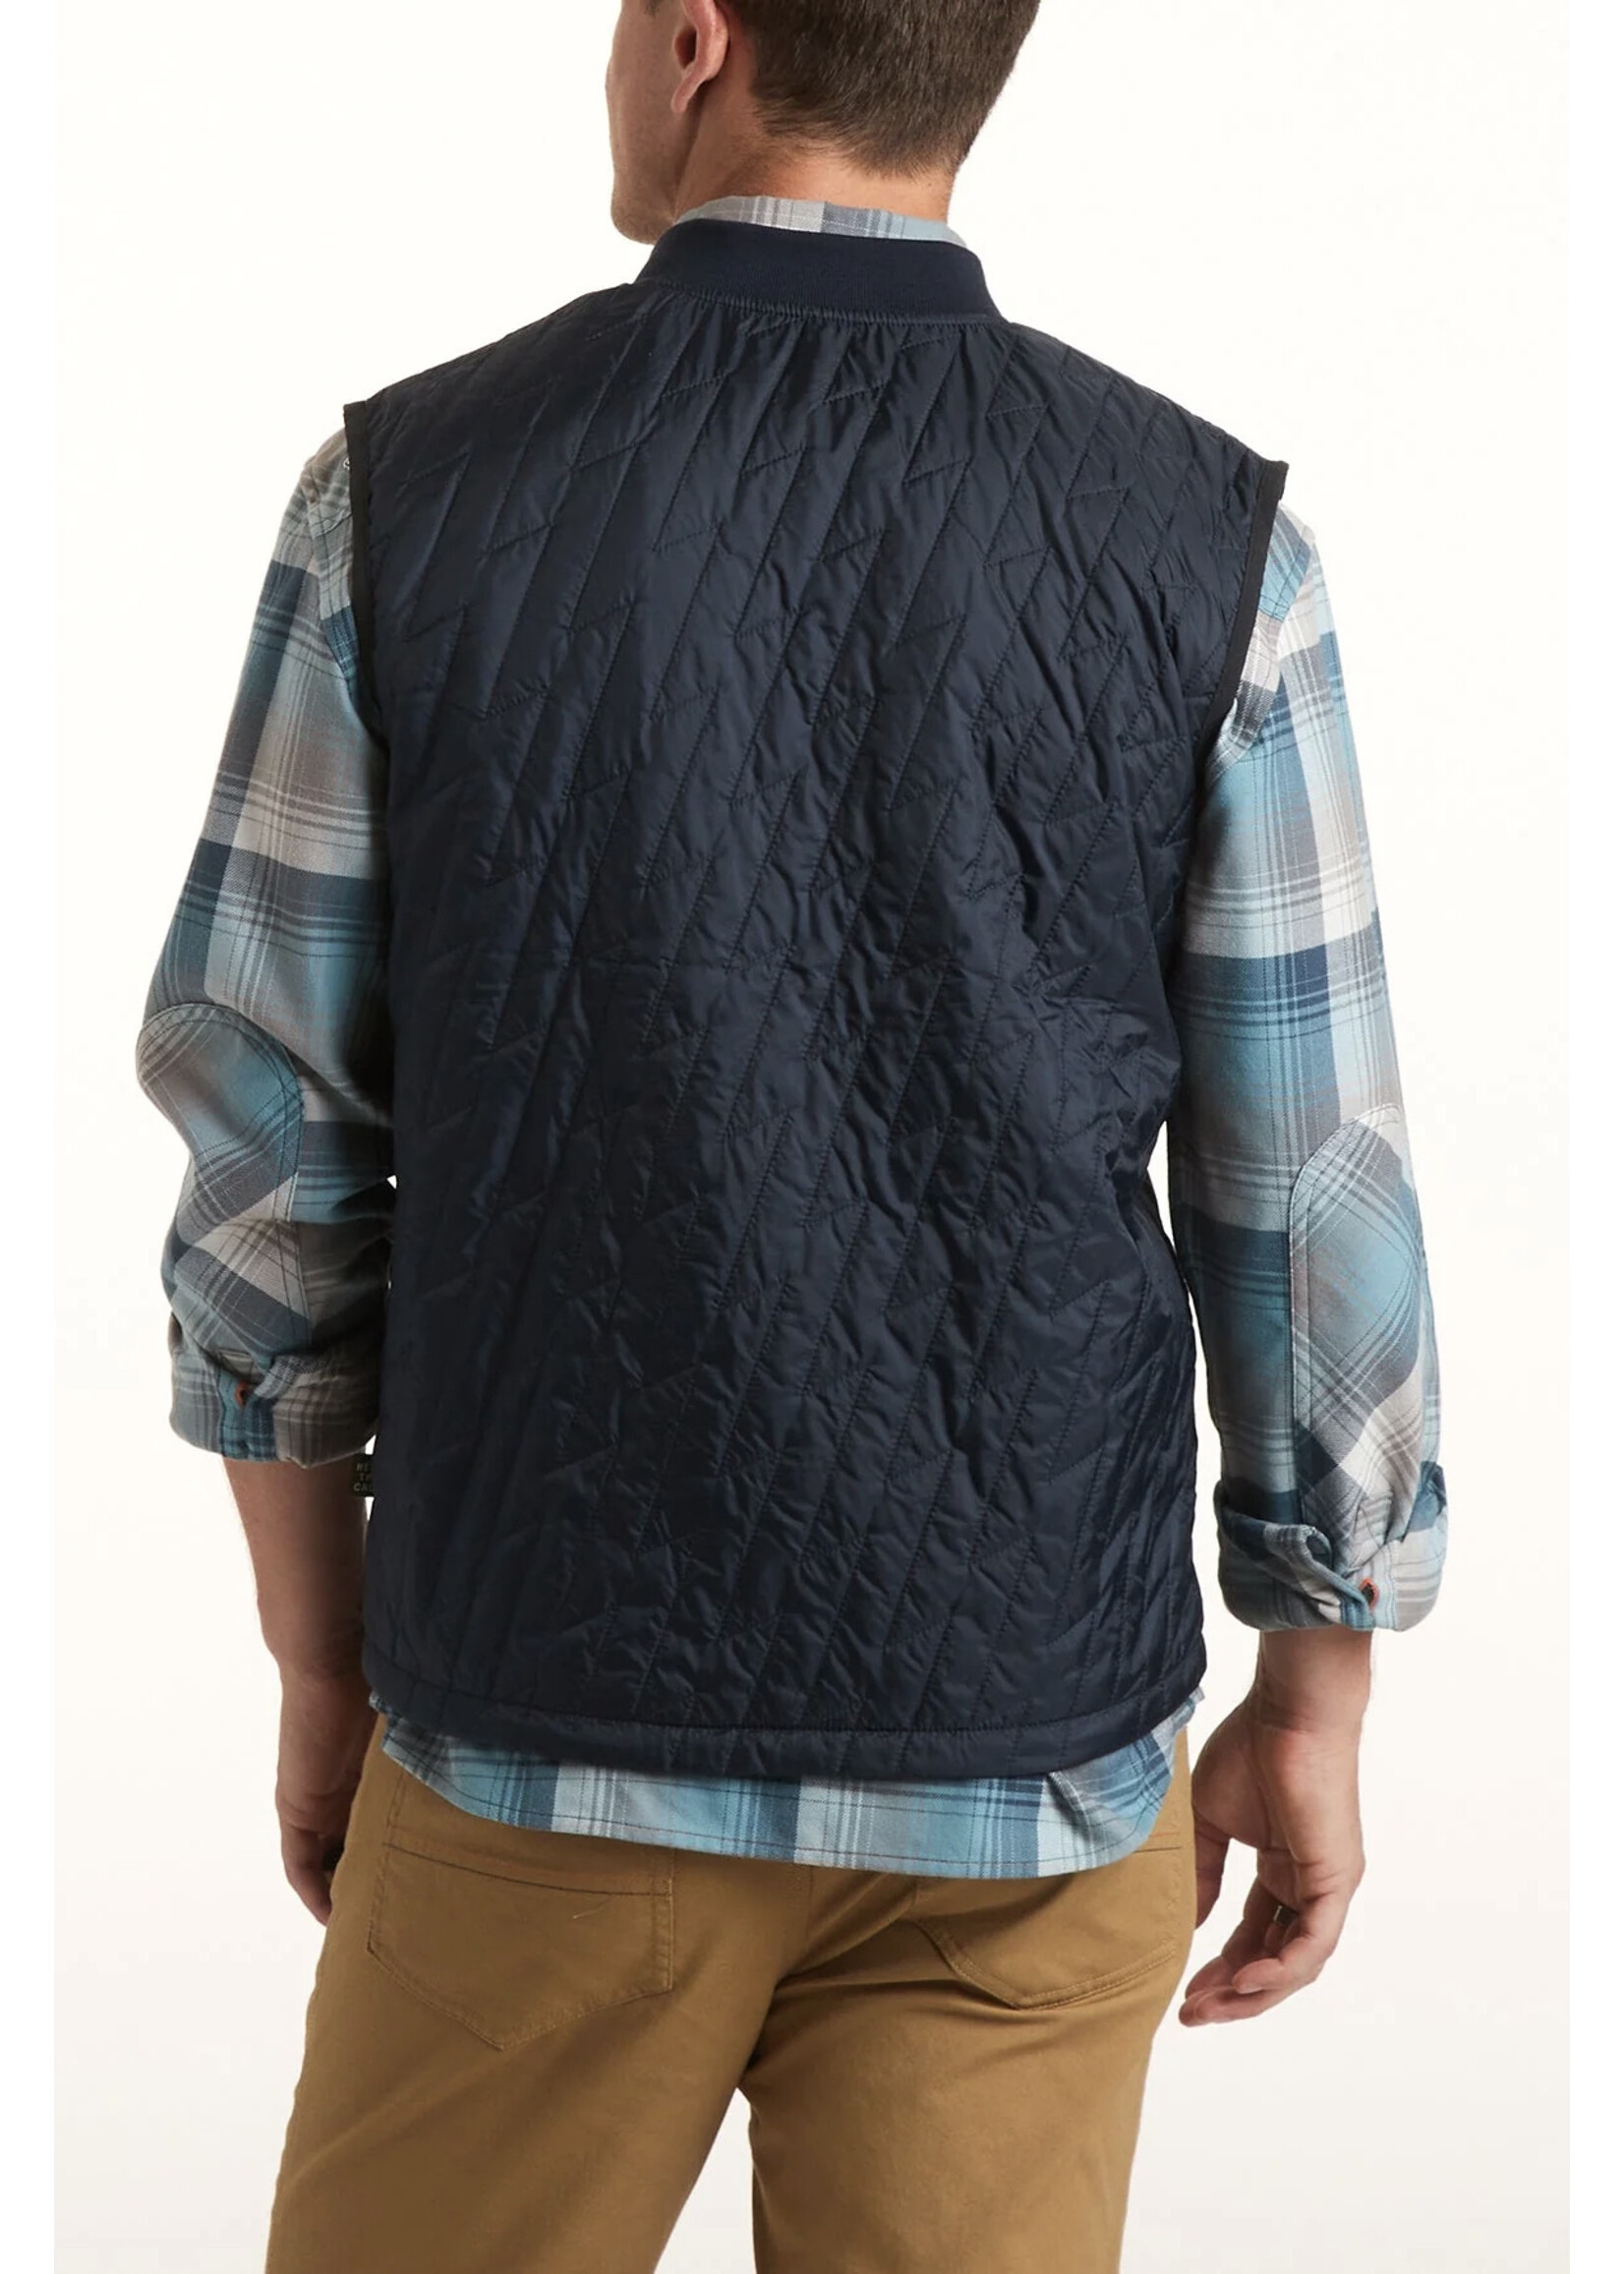 Howler Brothers Voltage Quilted Vest